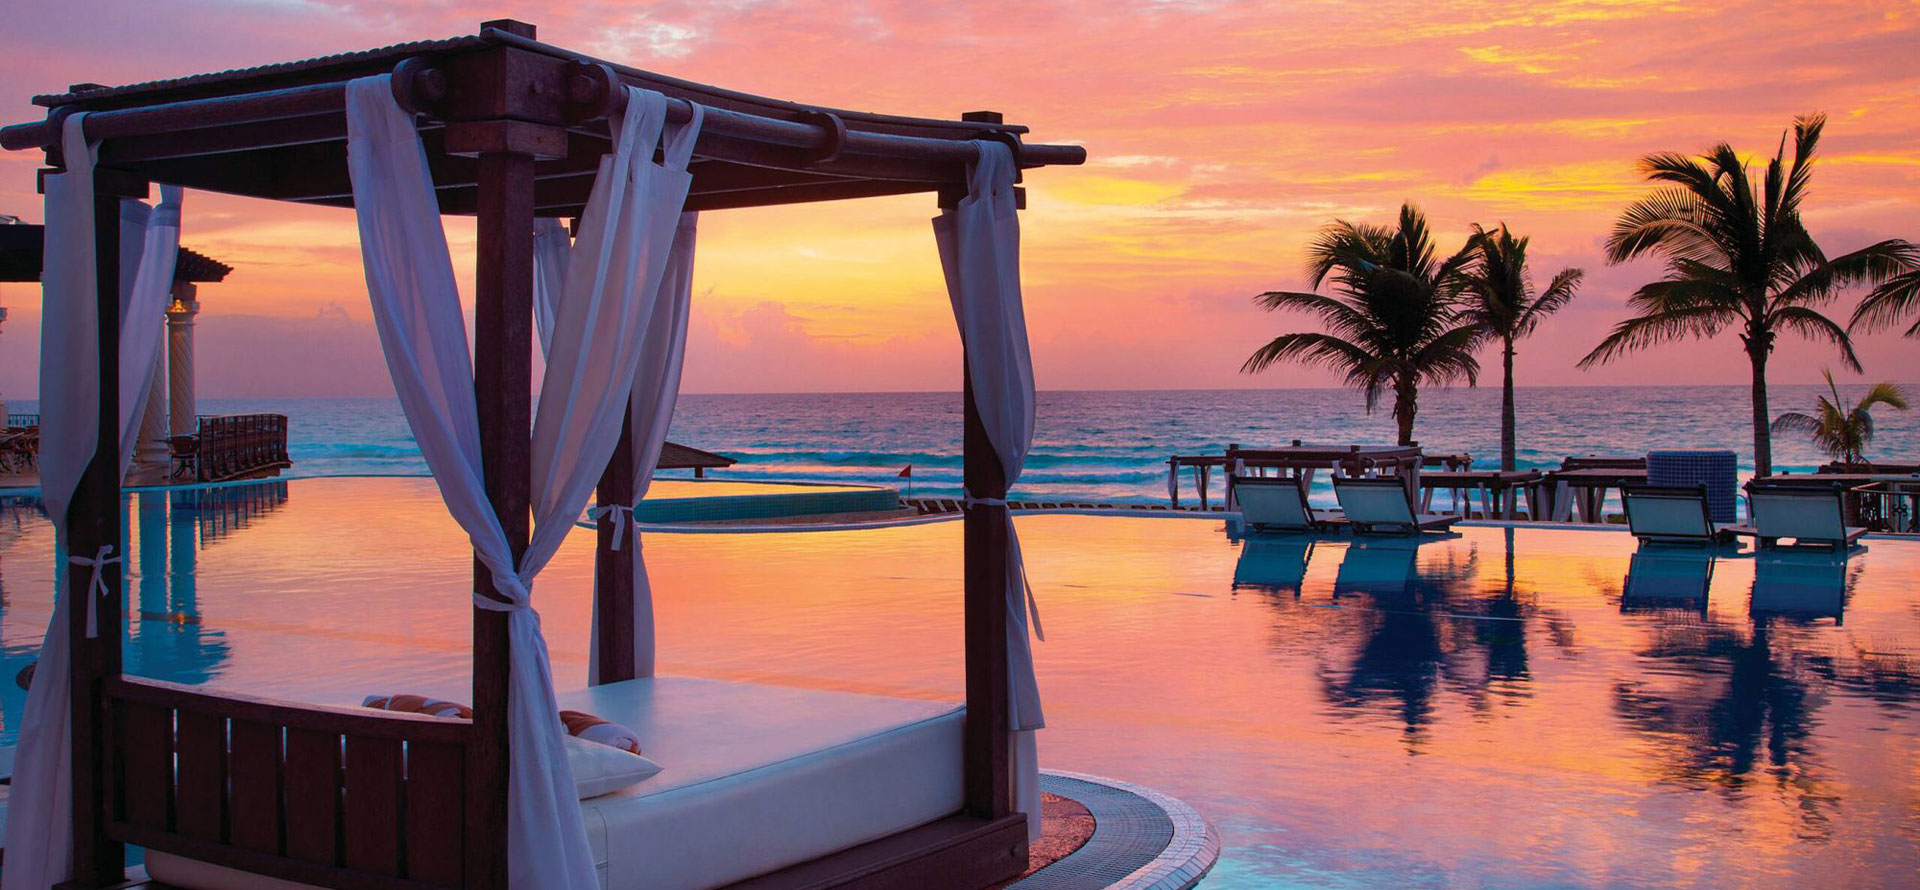 Jamaica all-inclusive adults only resort at sunset.